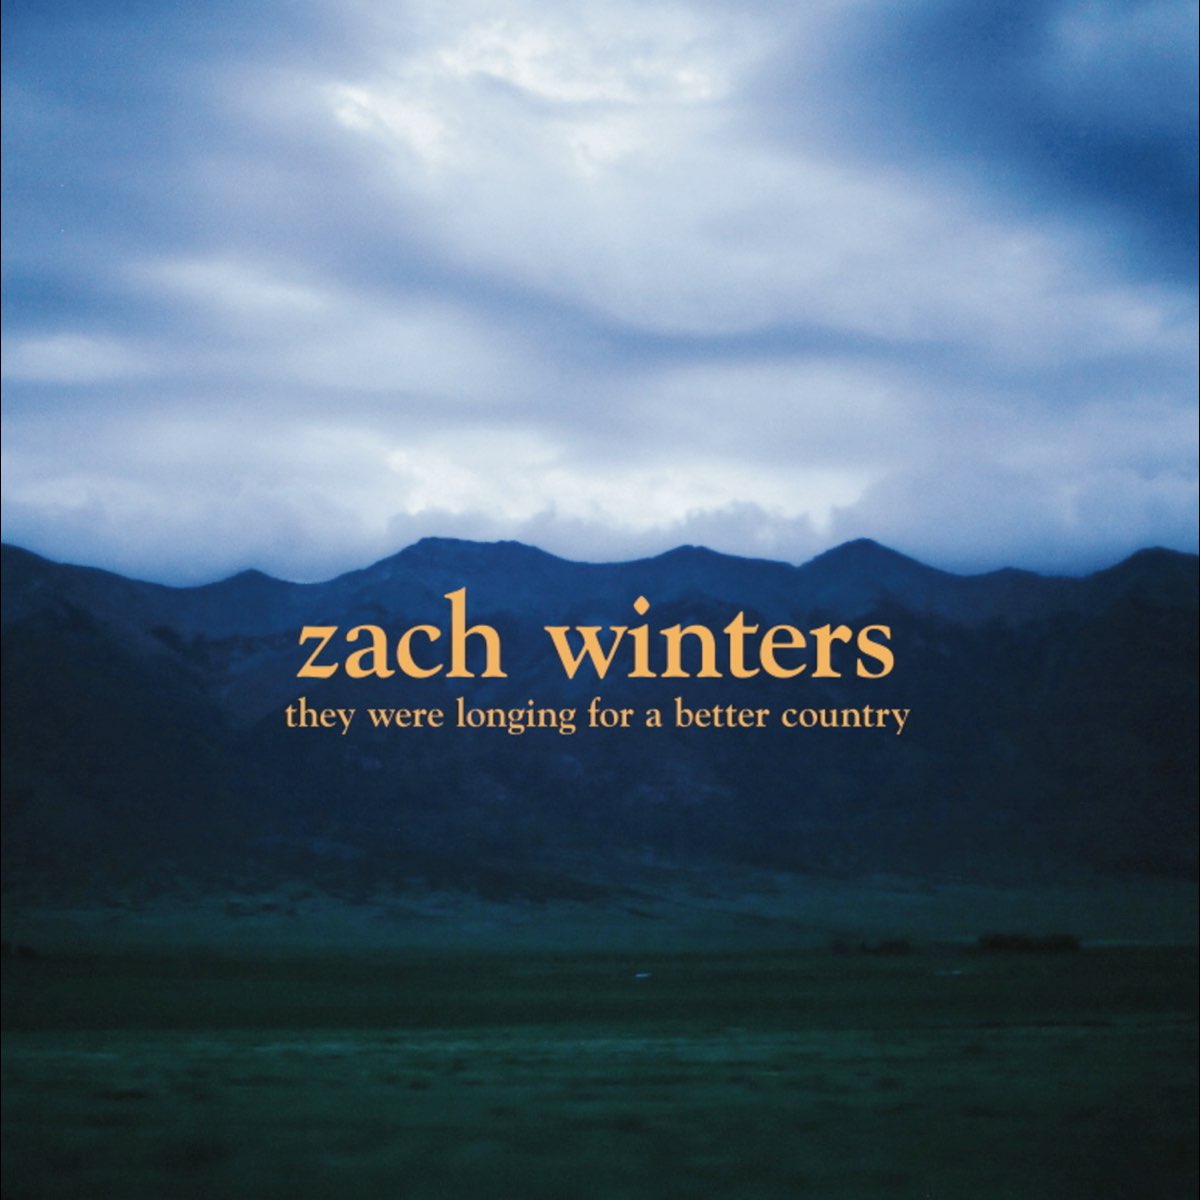 Longing for down. Zach Country. Zachary Winters. The longing. Longing for.